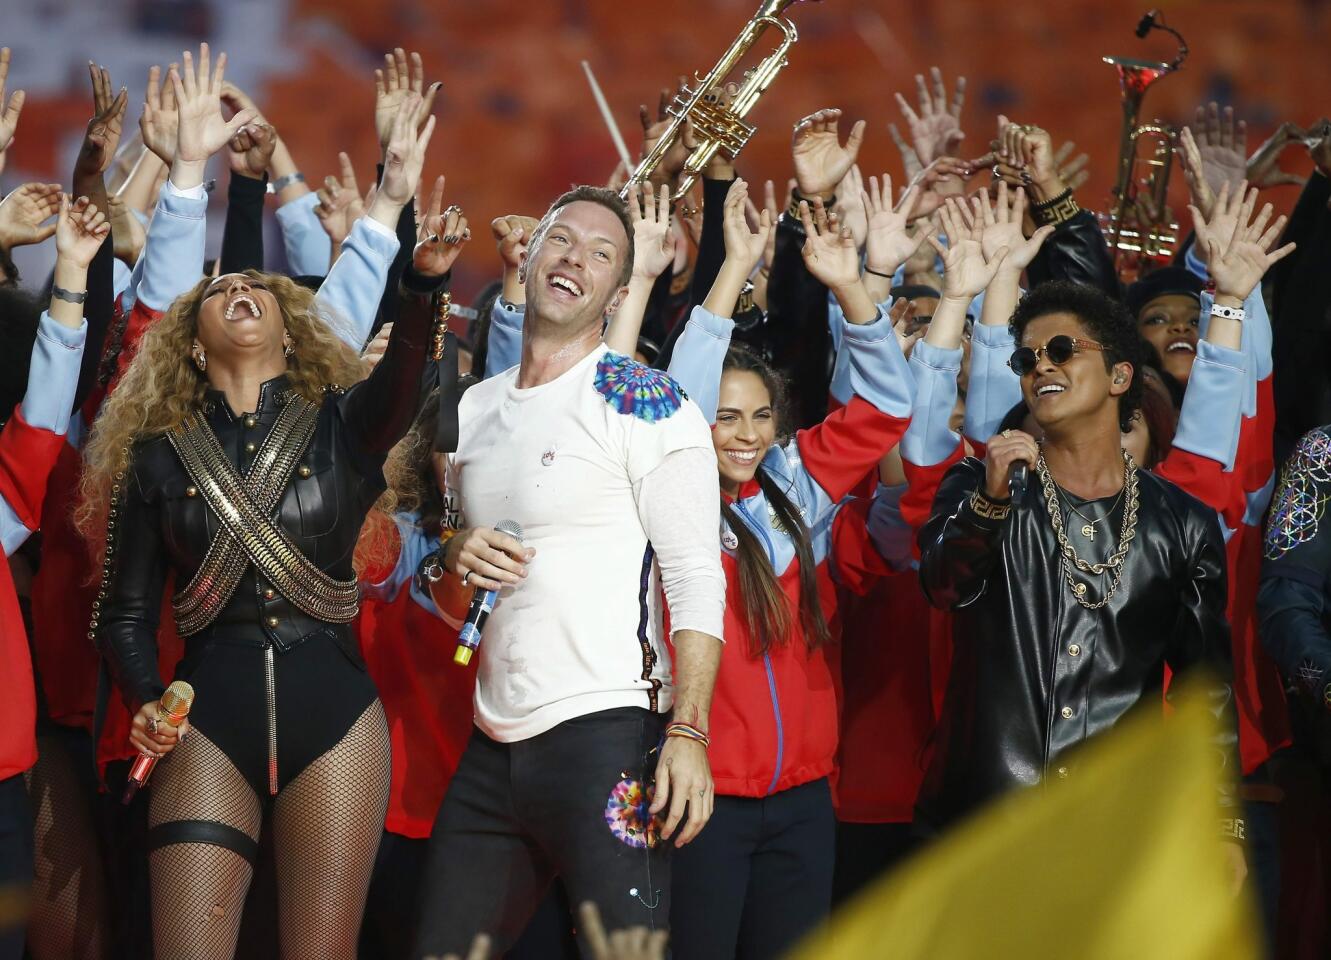 Beyonce, Chris Martin and Bruno Mars perform during the halftime show of the NFL's Super Bowl 50. EFE/EPA/TANNEN MAUR